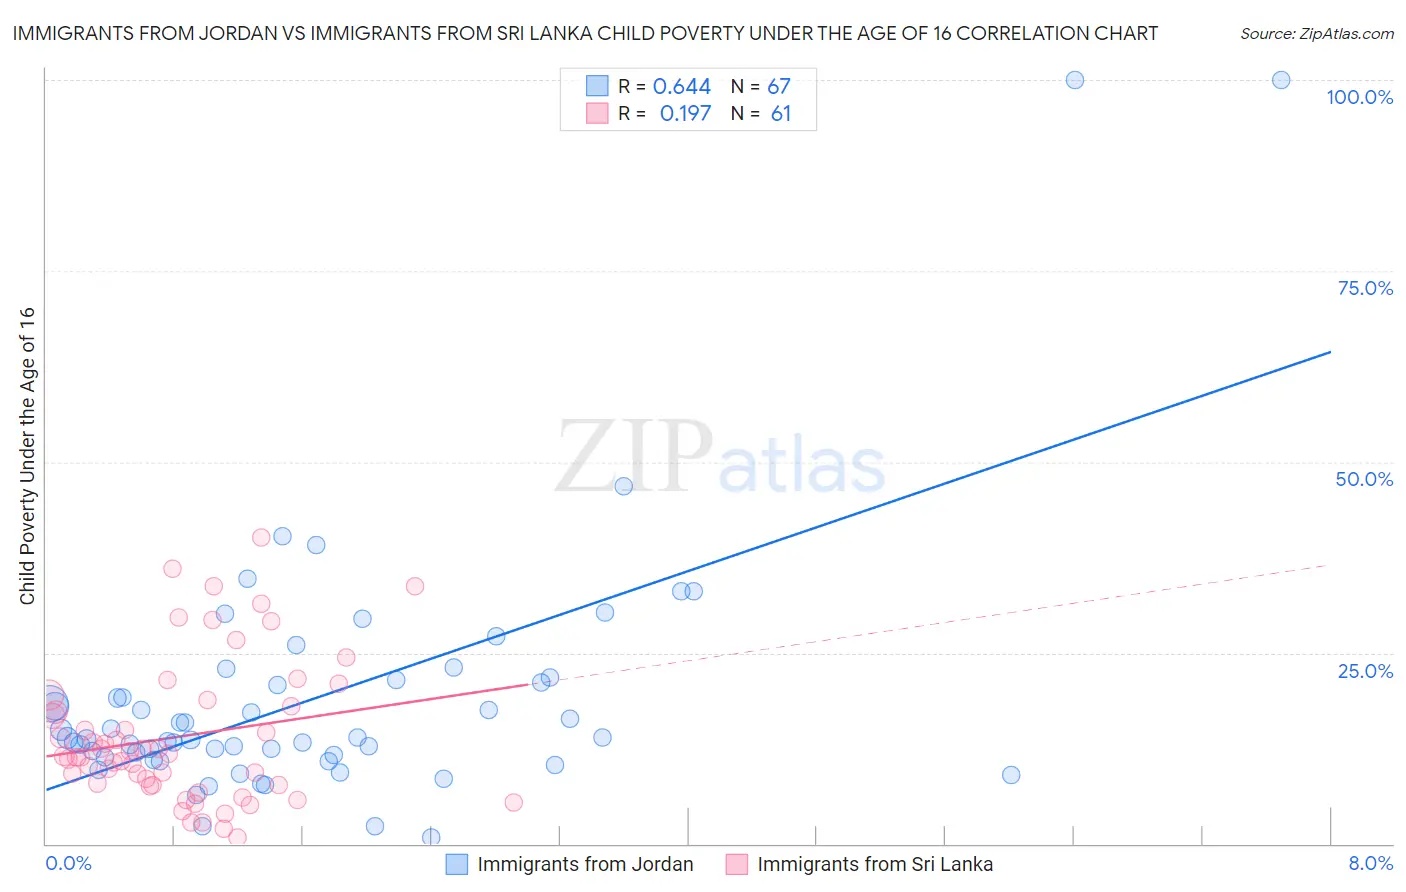 Immigrants from Jordan vs Immigrants from Sri Lanka Child Poverty Under the Age of 16